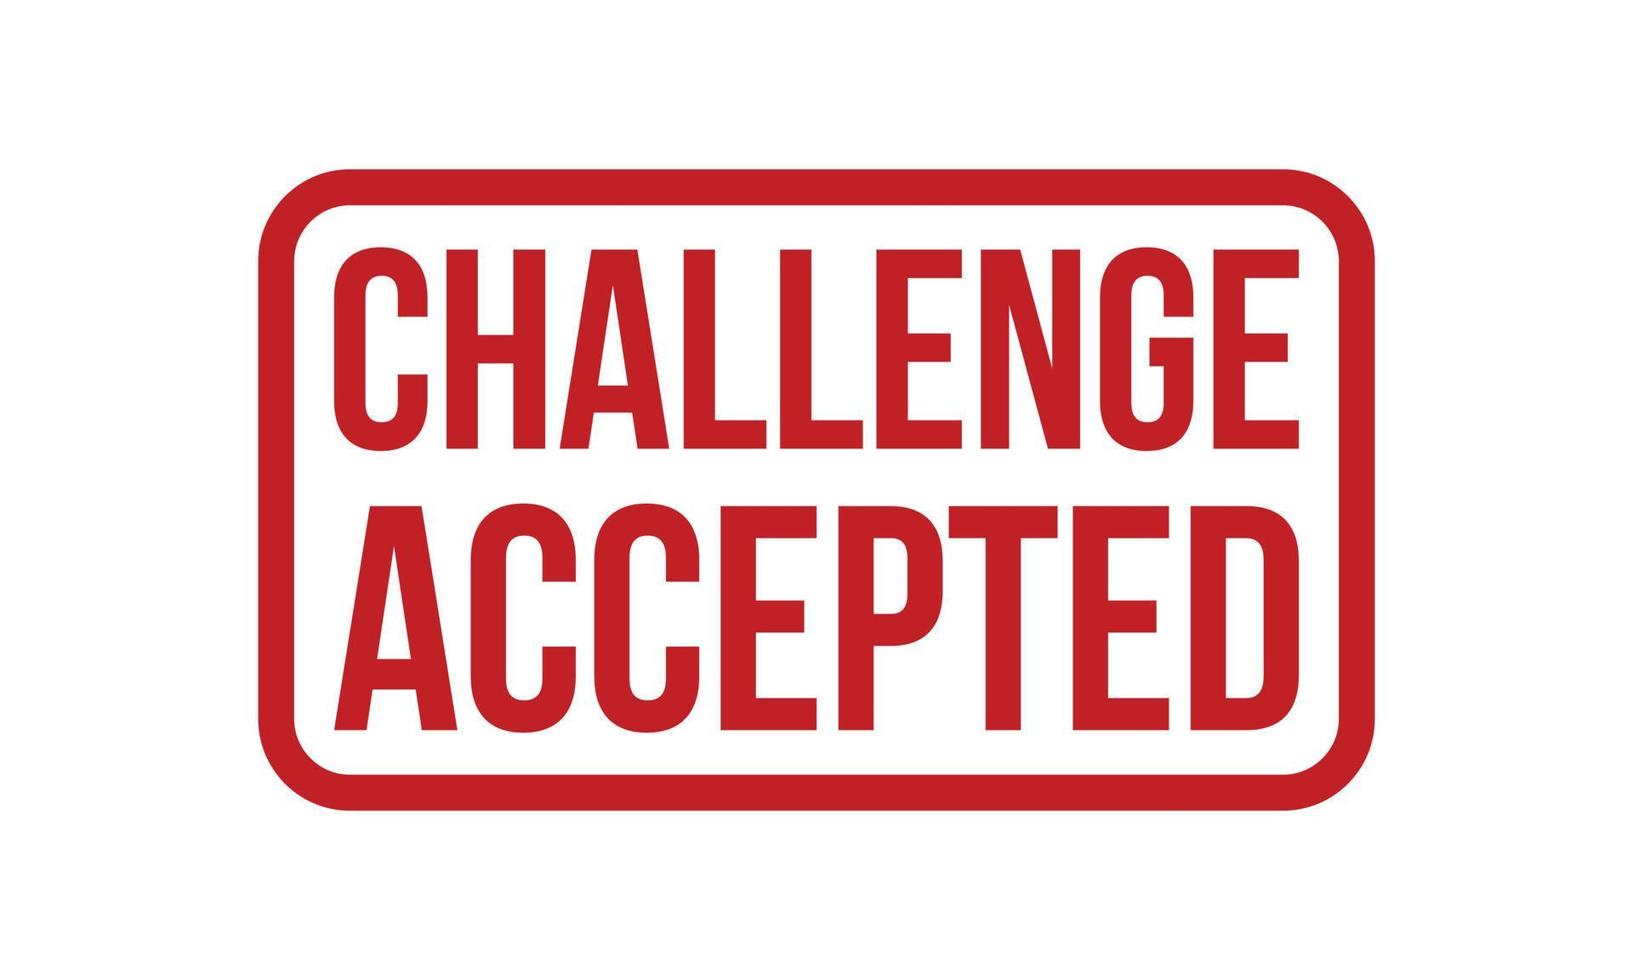 Challenge Accepted Rubber Stamp. Red Challenge Accepted Rubber Grunge Stamp Seal Vector Illustration